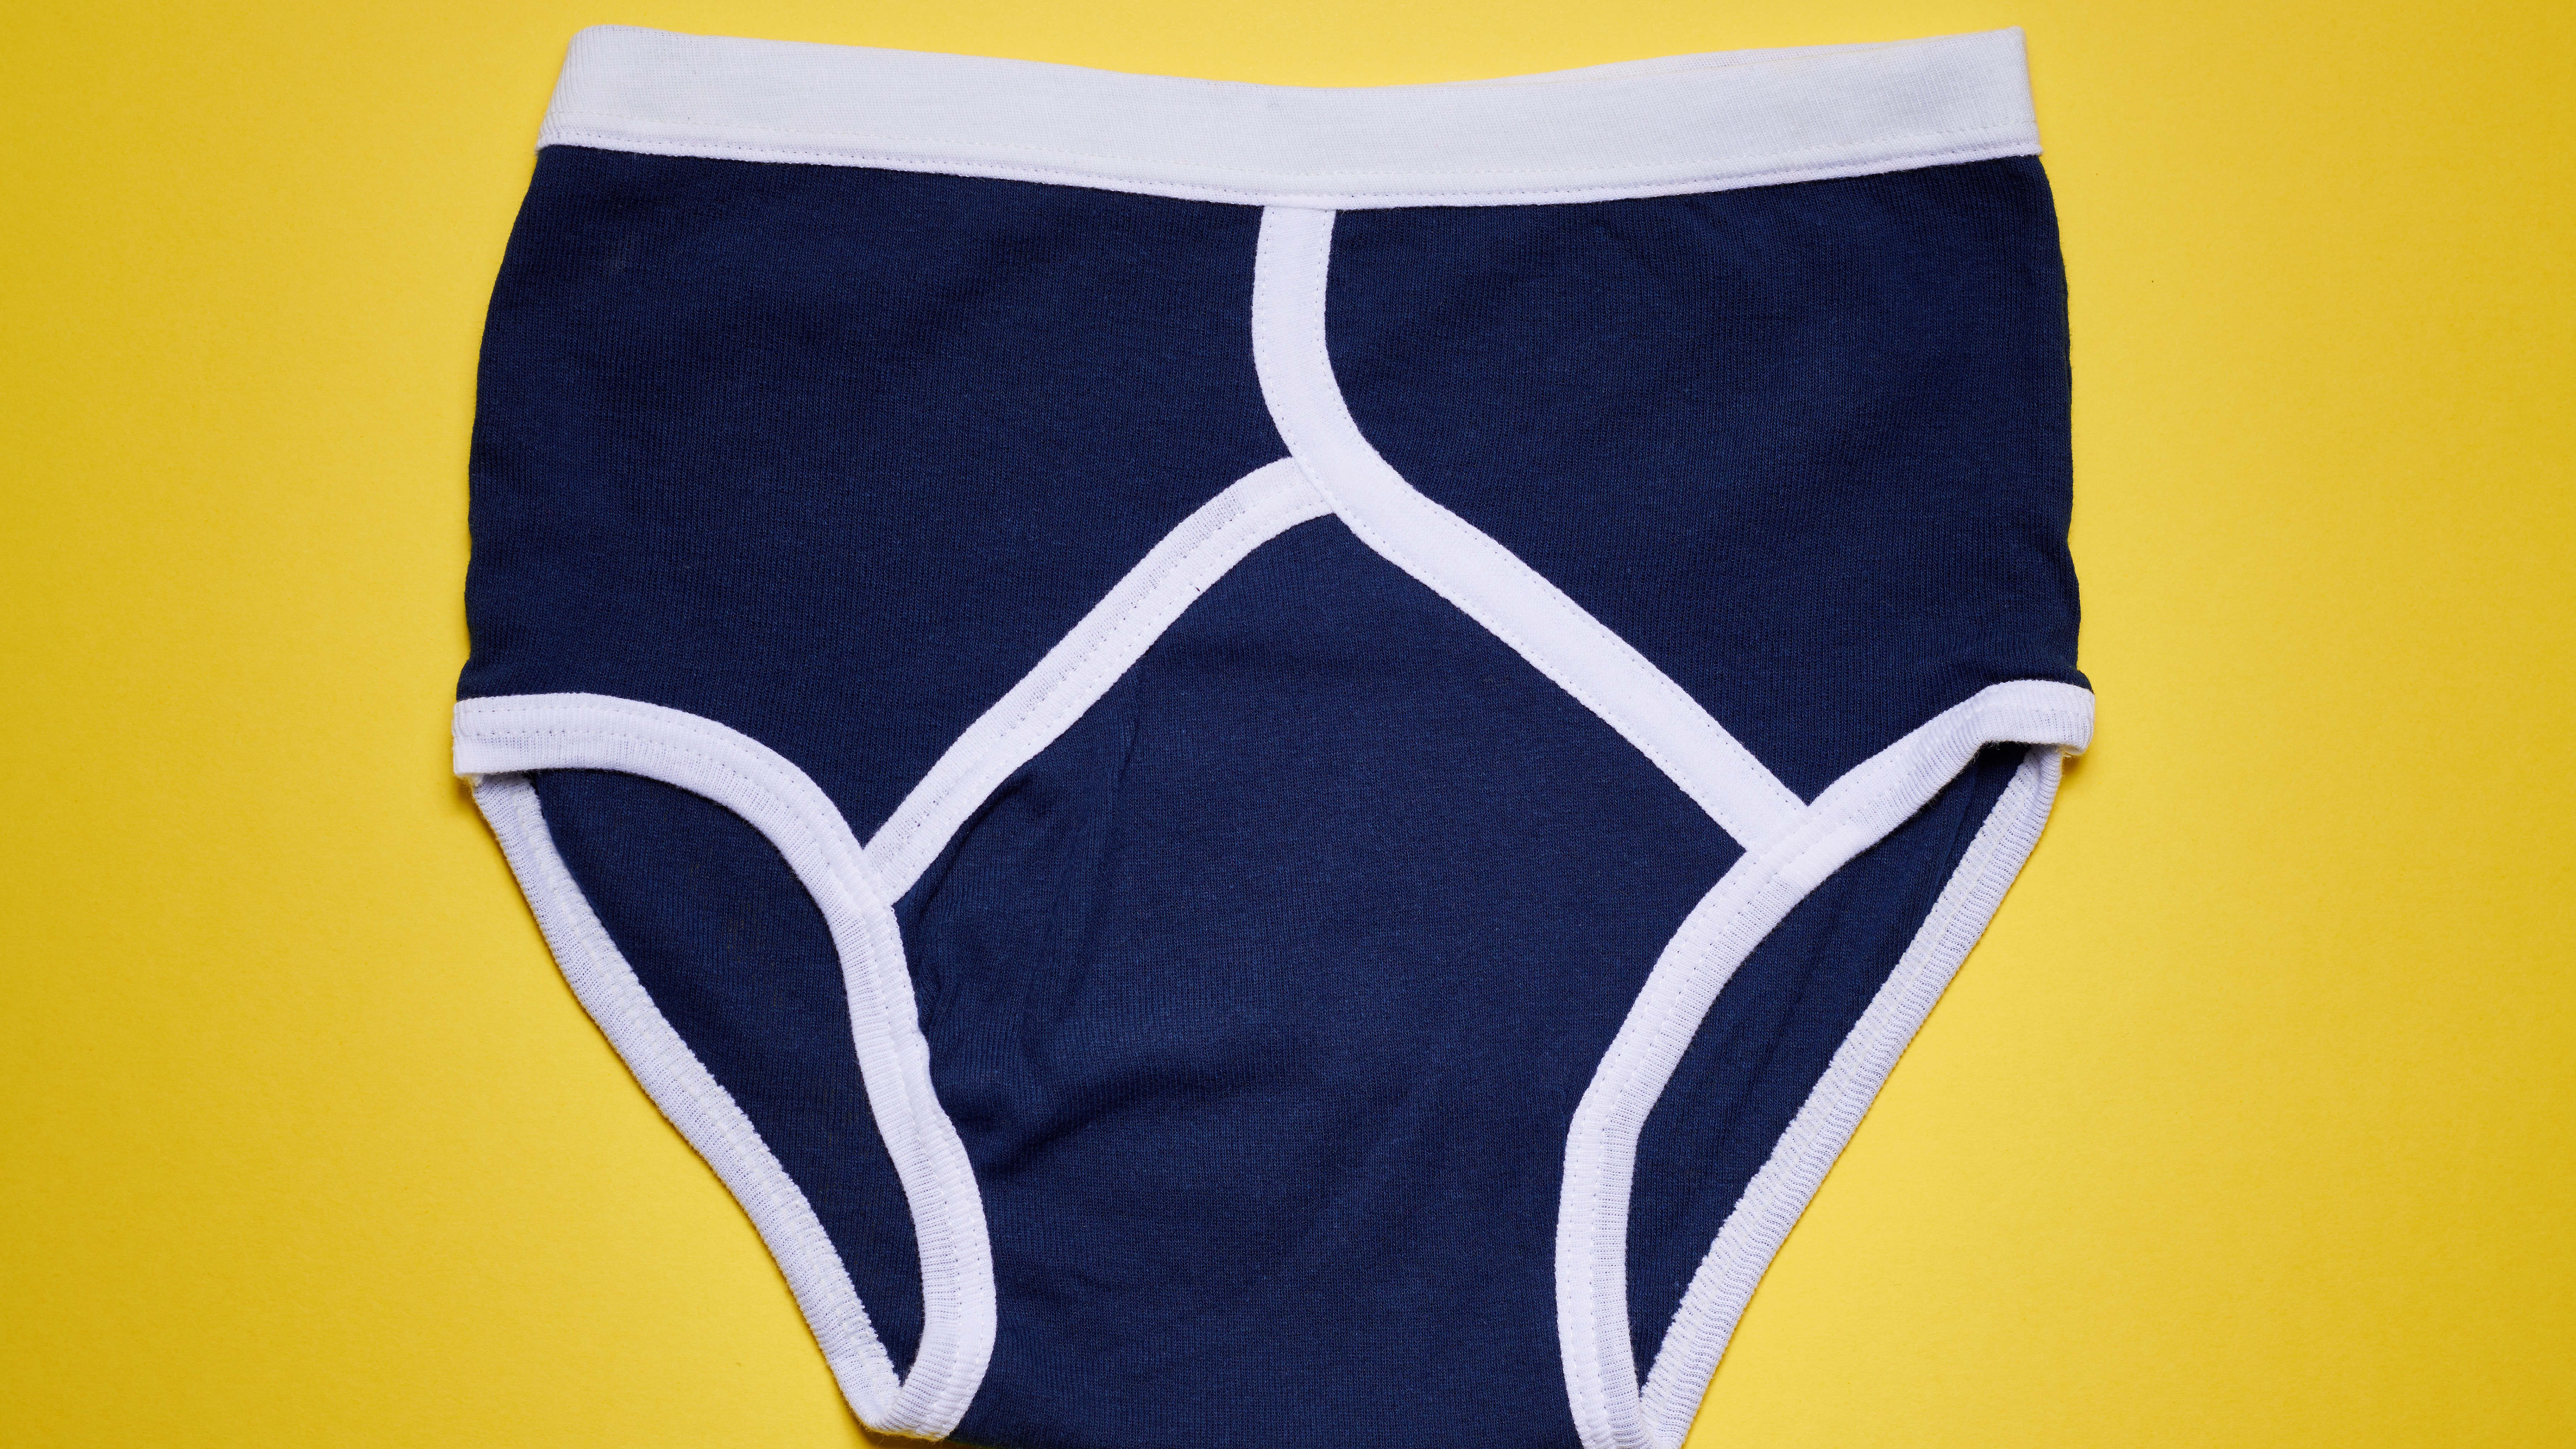 What kind of underwear do you wear hiking?